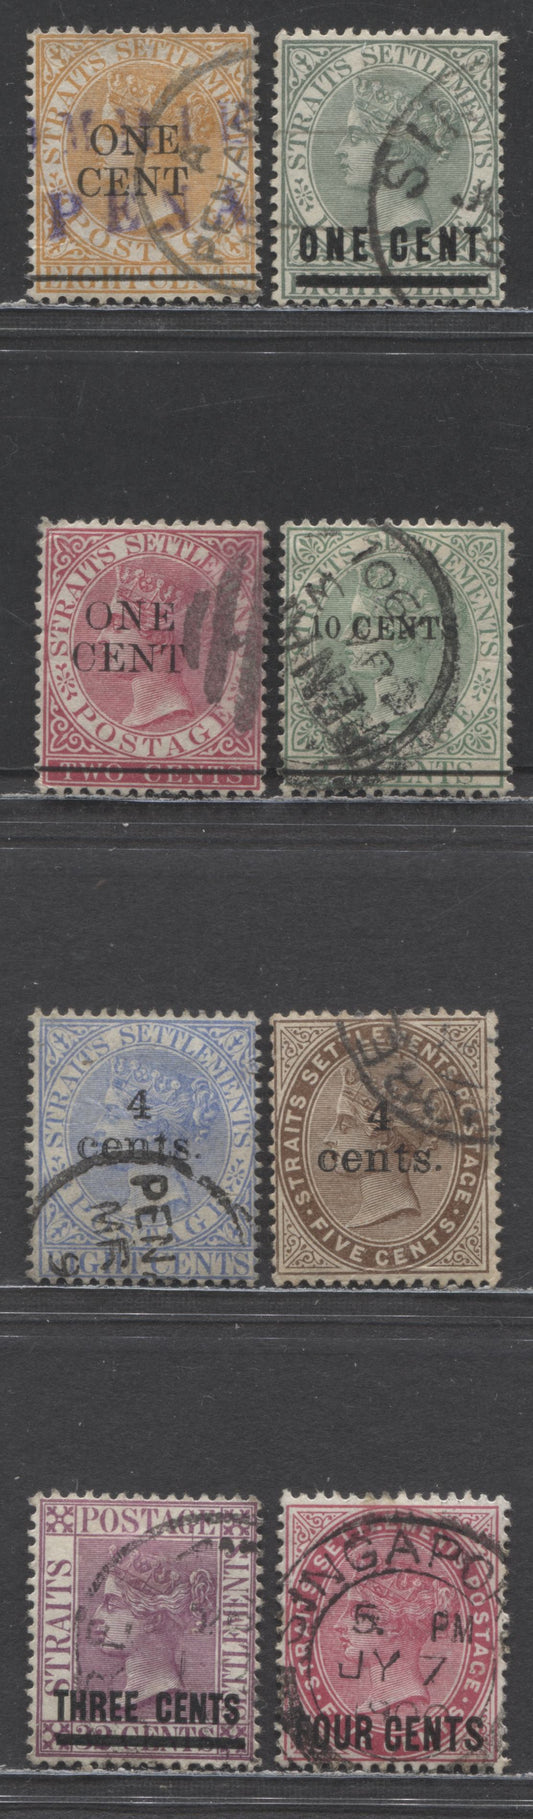 Lot 66 Straits Settlements SC#73/92 1885-1899 Surcharged Issue, 8 Fine/Very Fine Used Singles, Click on Listing to See ALL Pictures, 2022 Scott Classic Cat. $23.15 USD